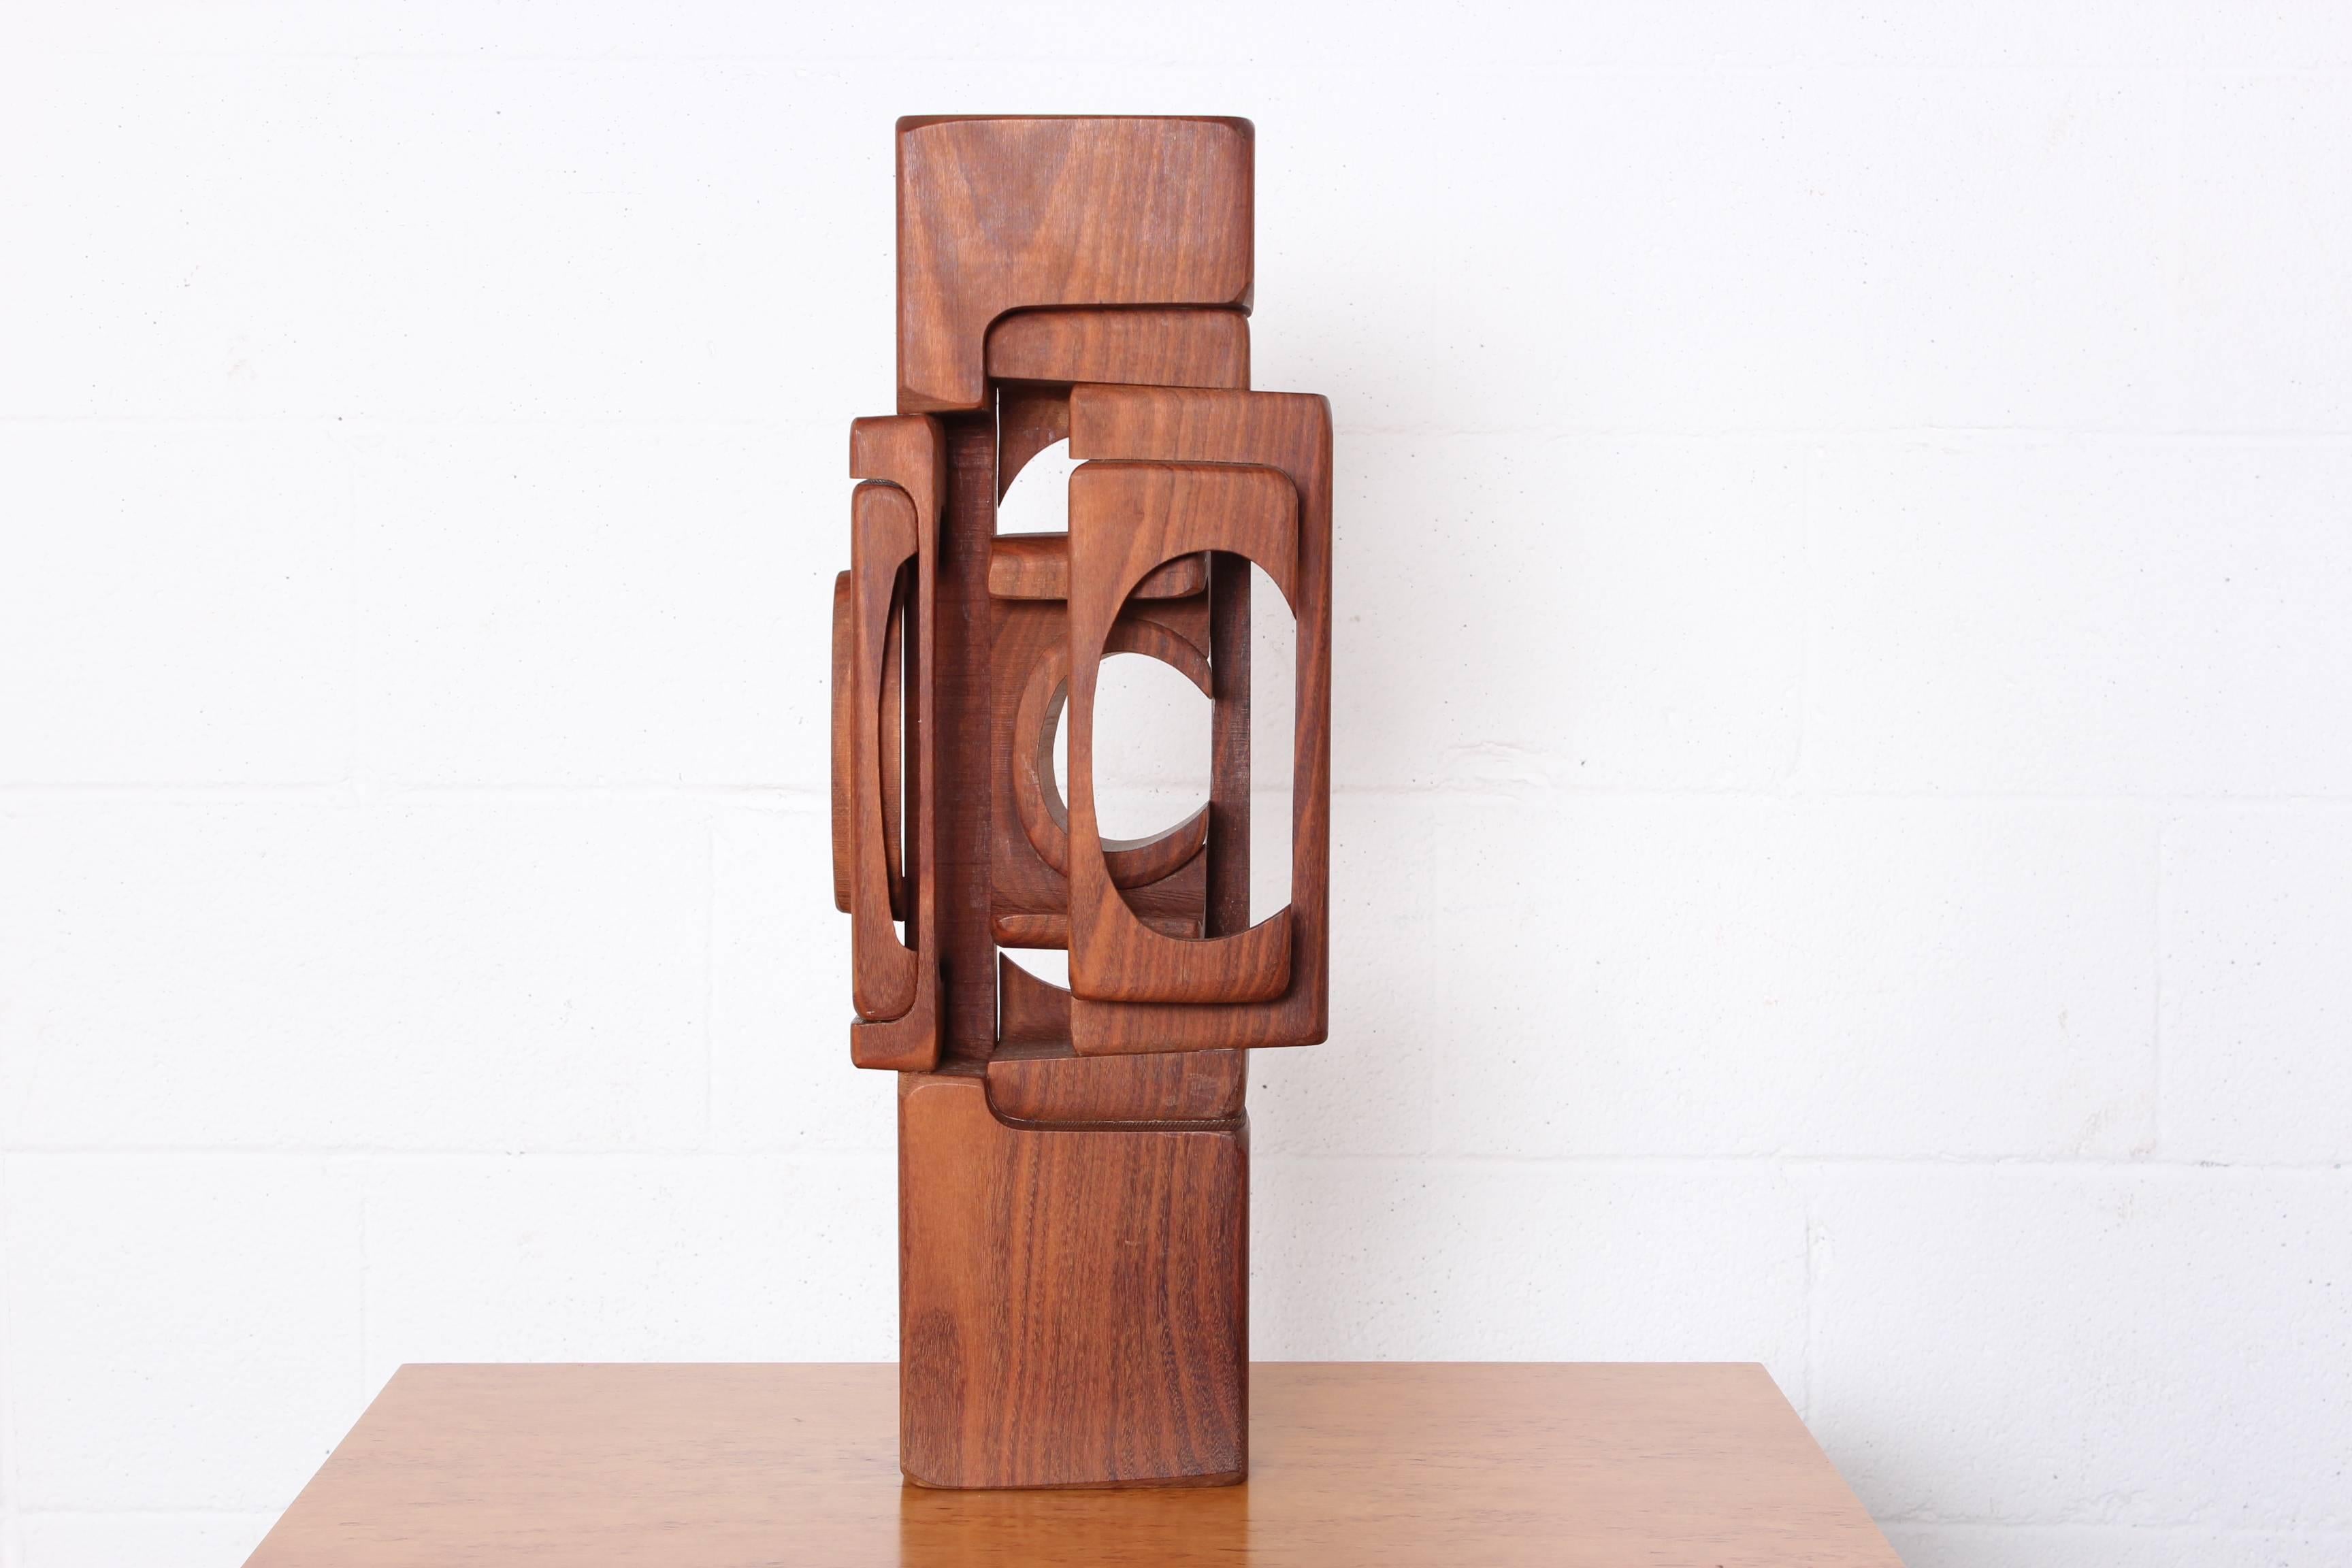 A carved and assembled wooden abstract sculpture by Brian Willsher, 1975.